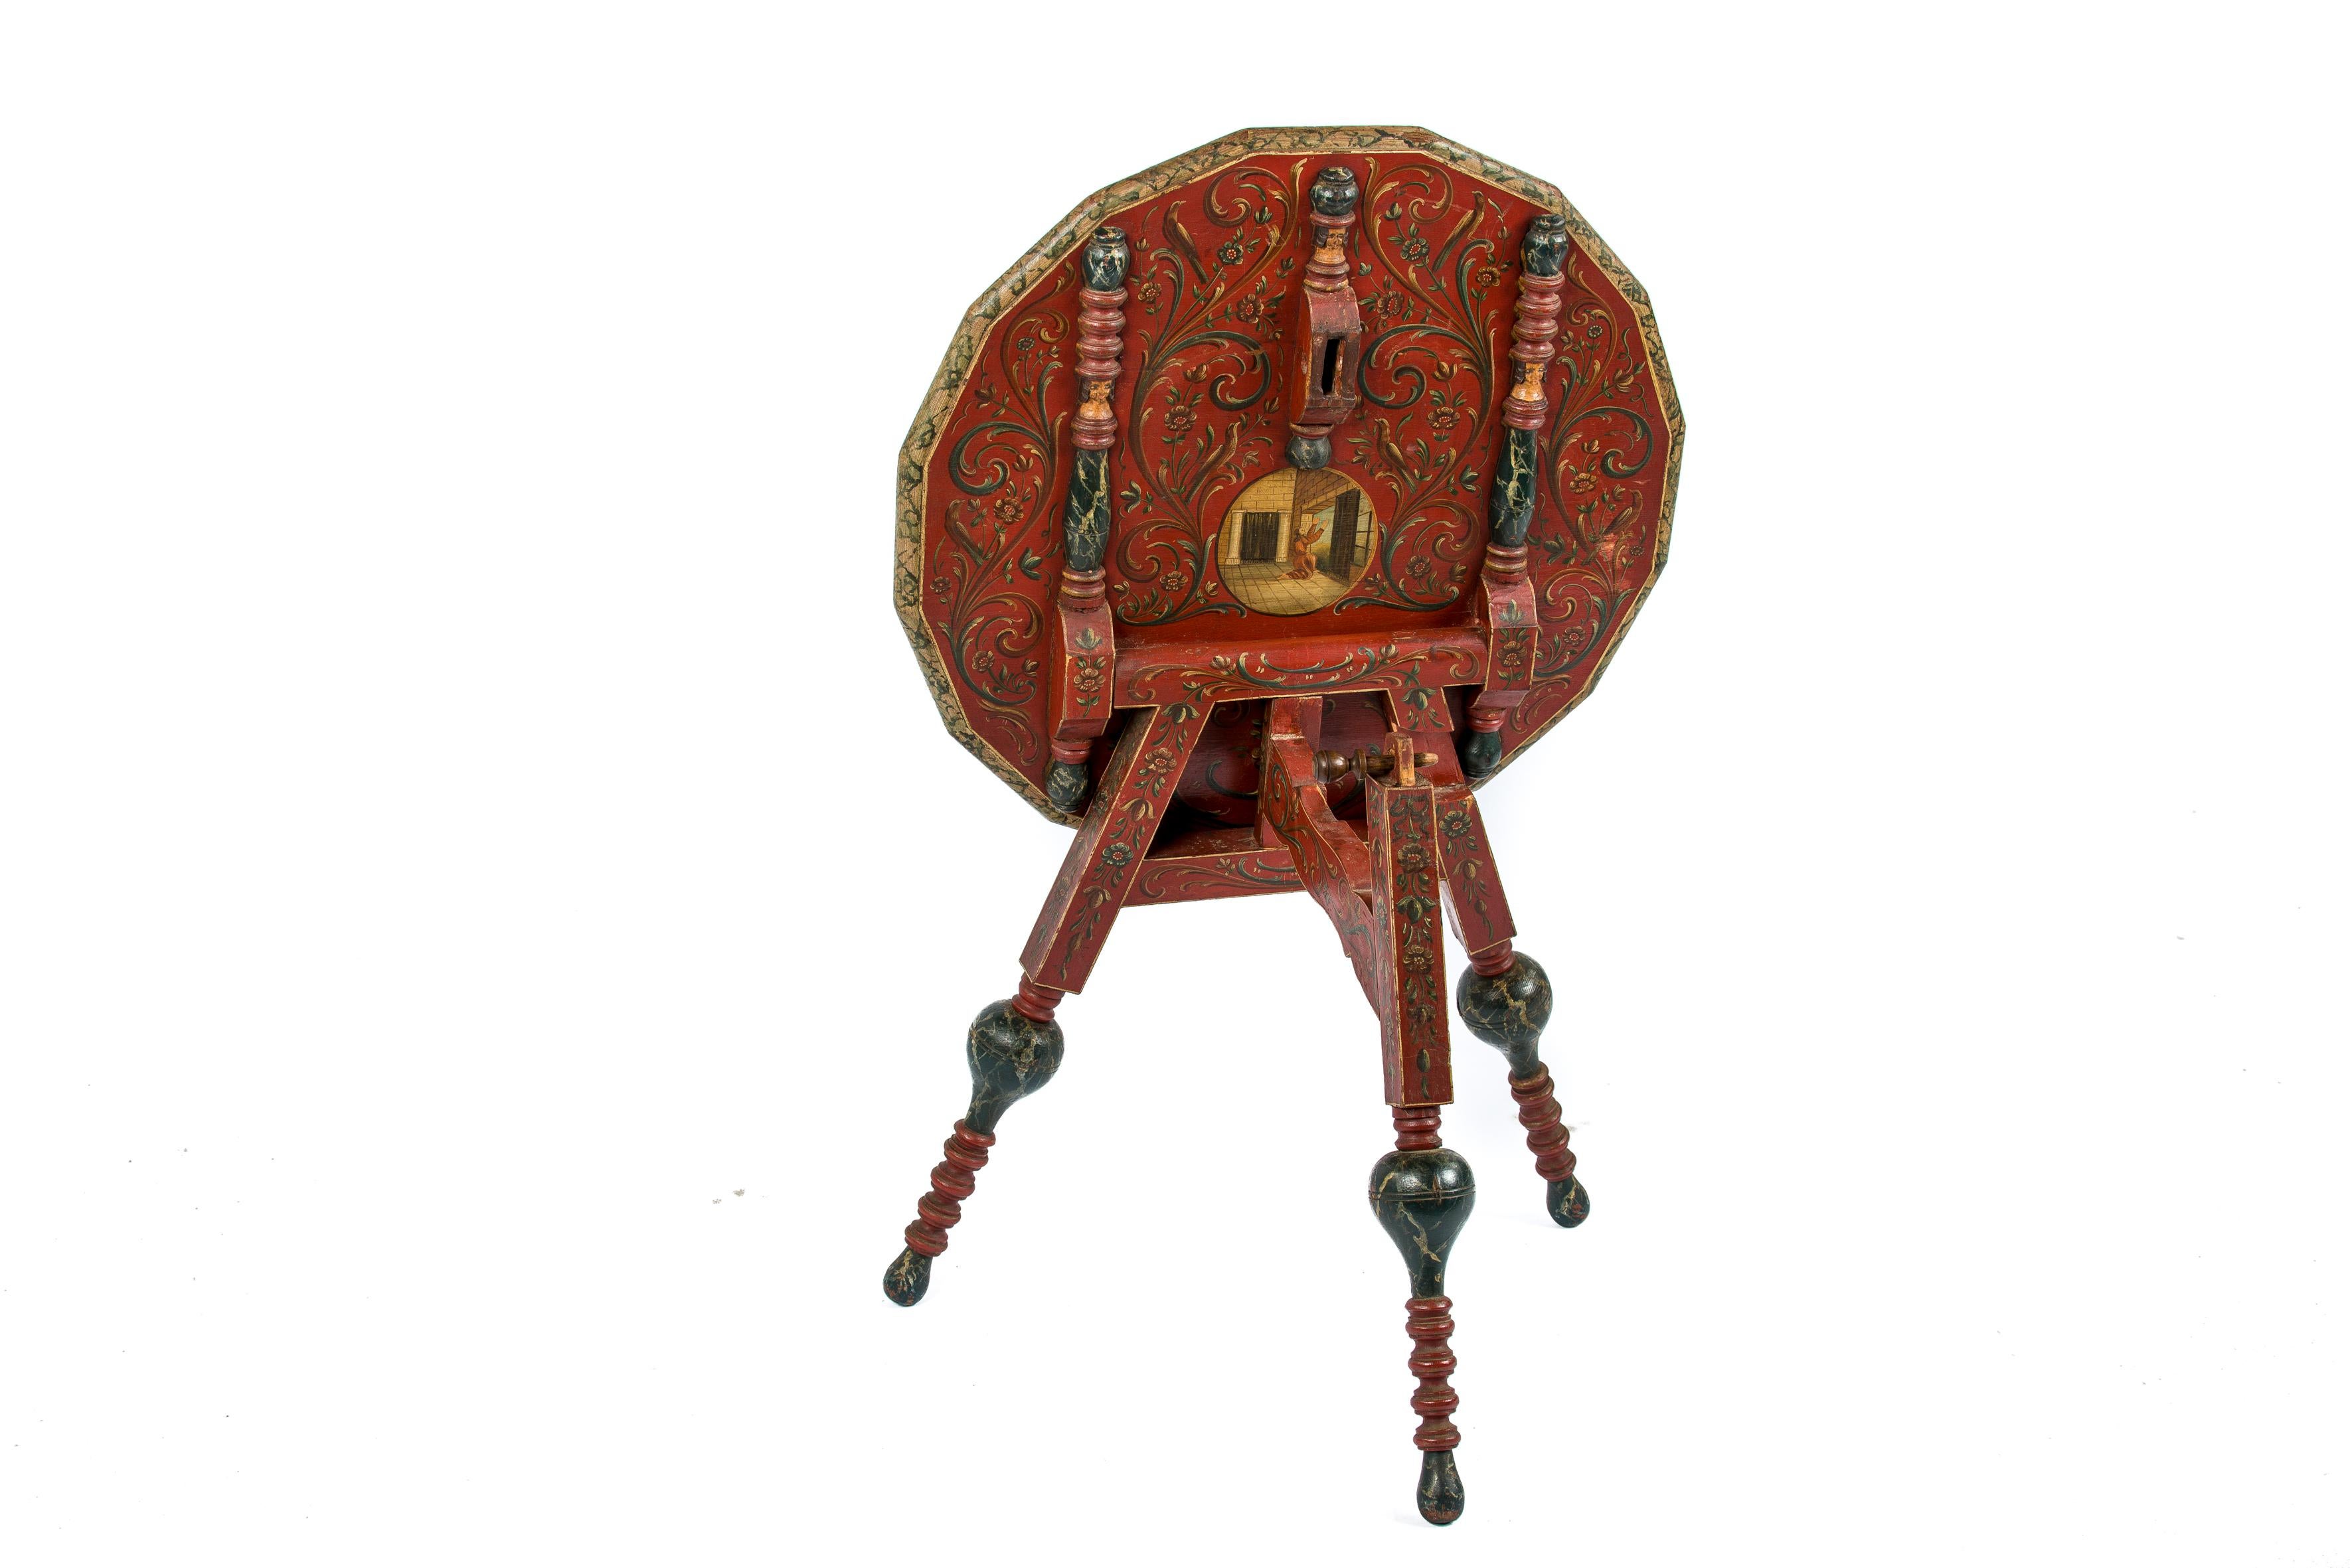 Pine Antique Early 19th Century Dutch Folk Art “Hindeloopen” Painted Tilt Top Table For Sale